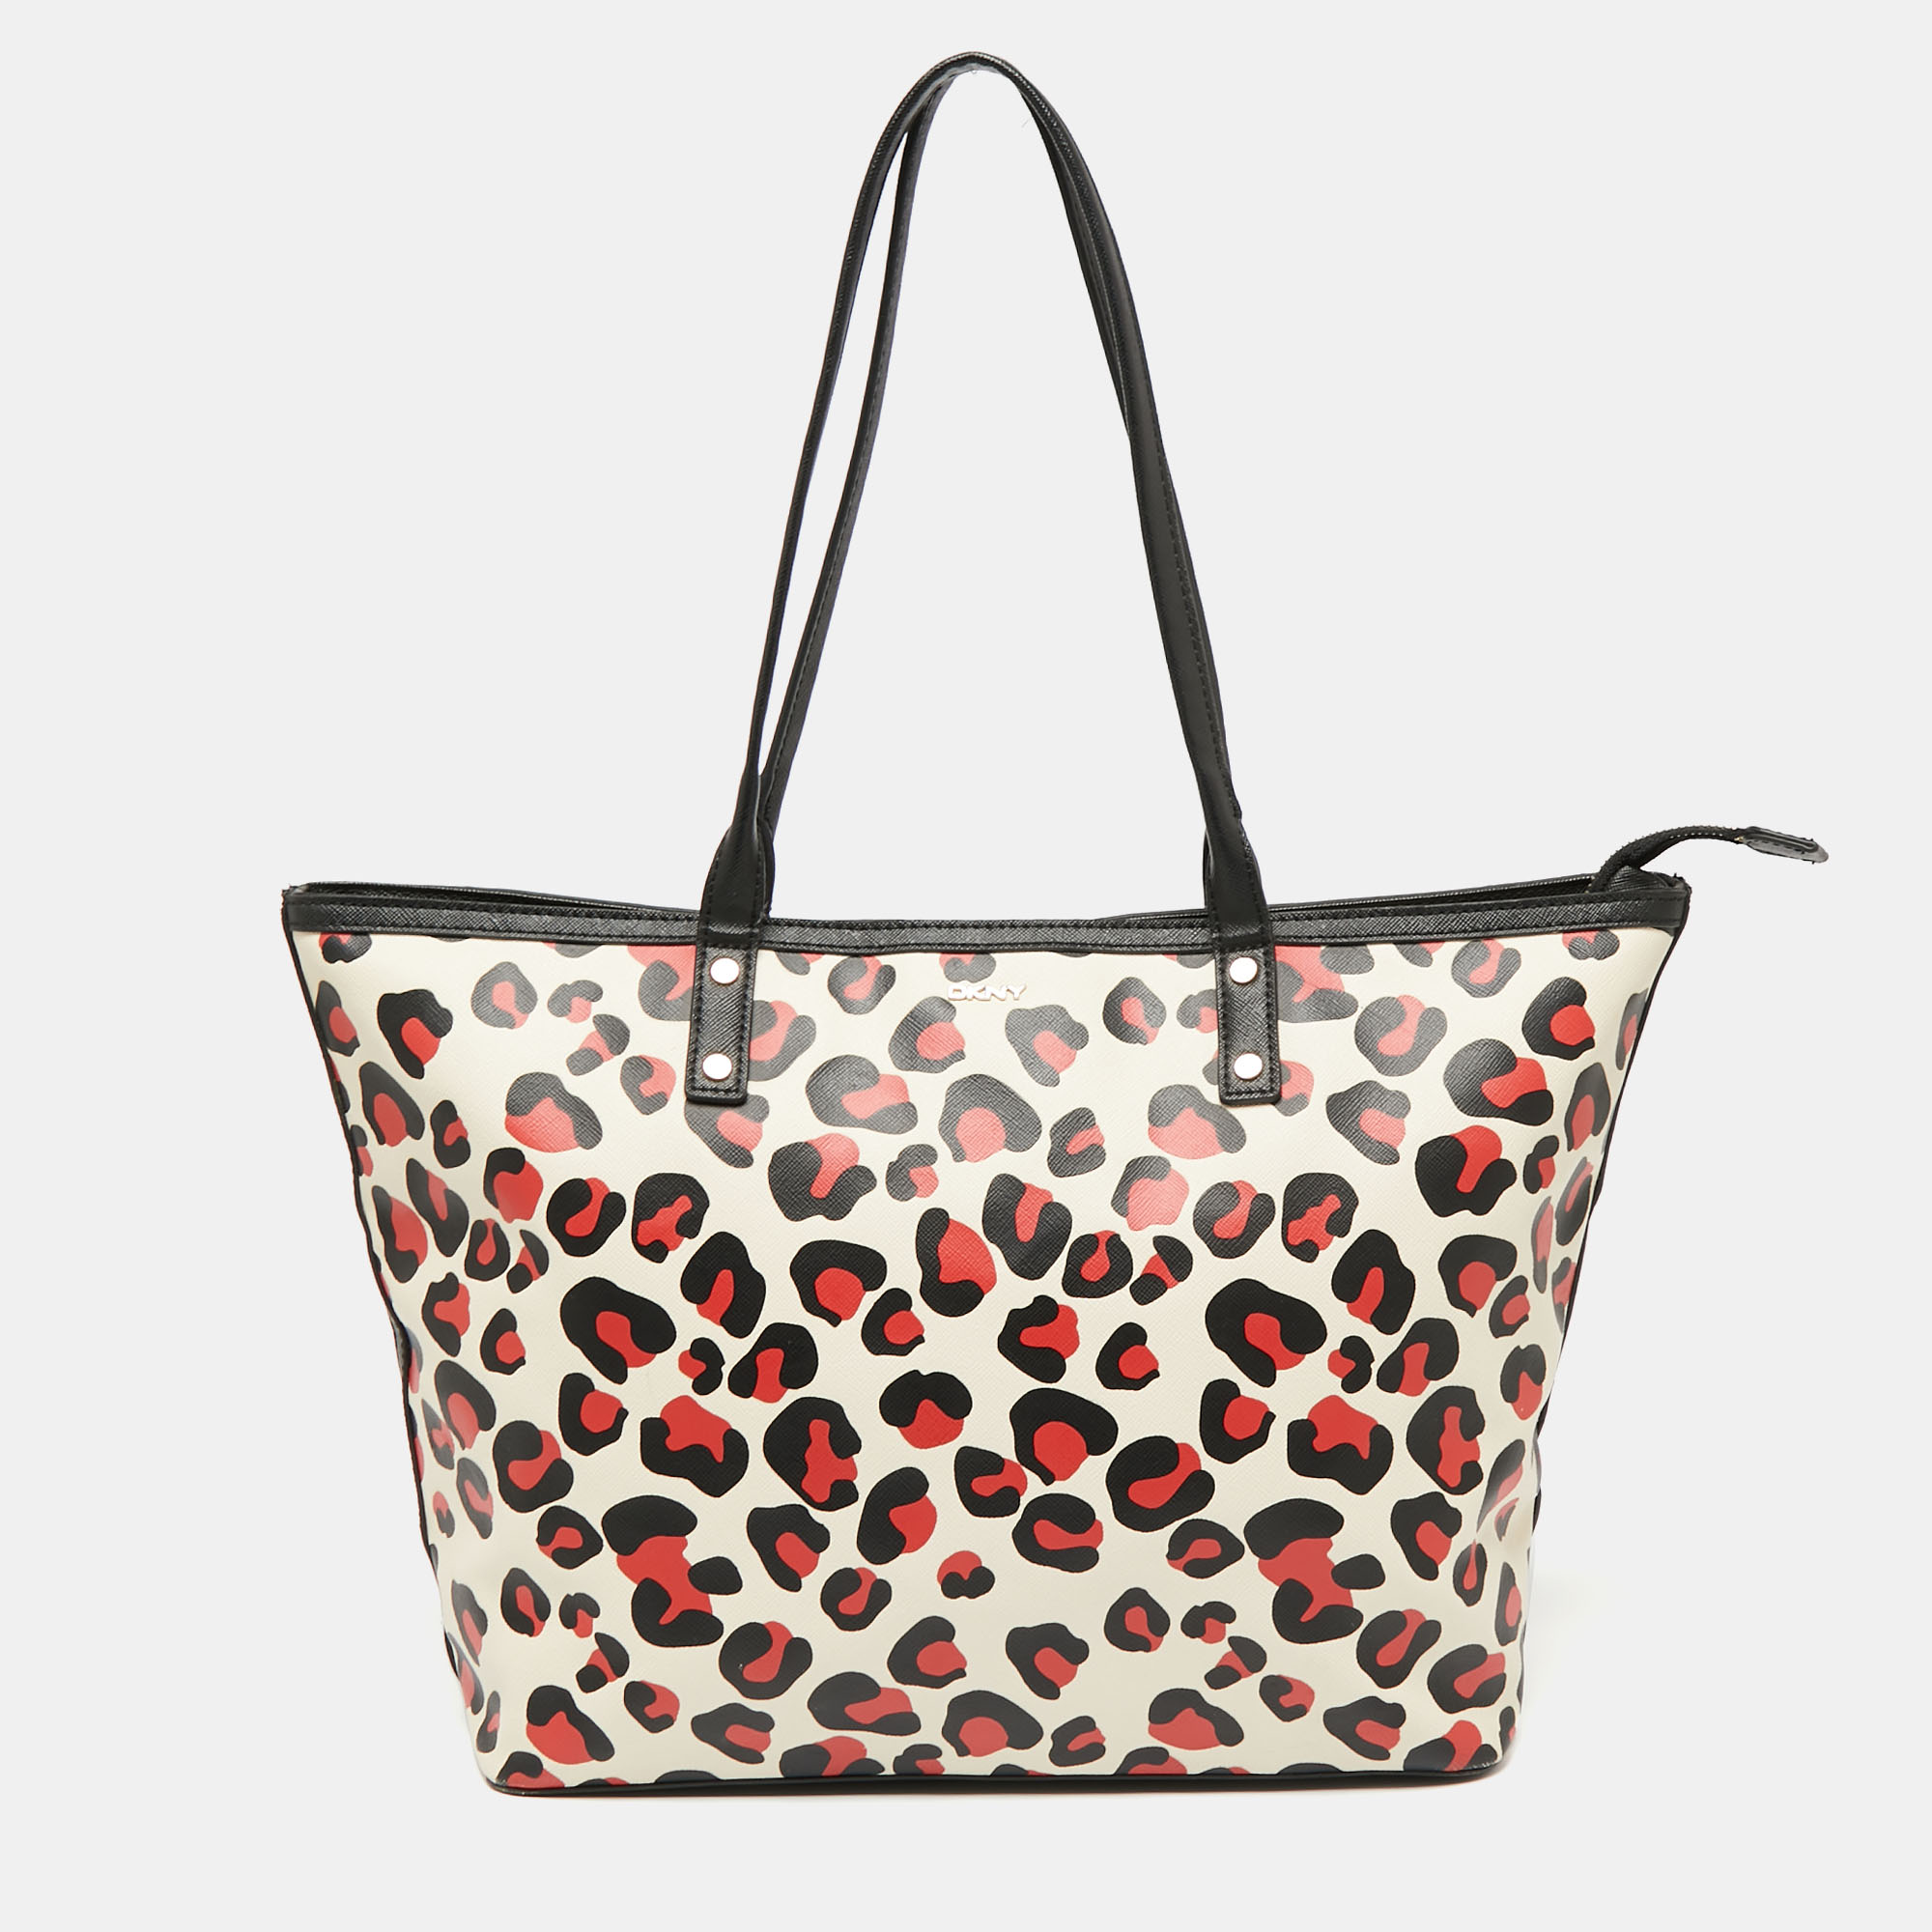 The leopard printed coated canvas of this Dkny tote makes it more appealing. It can be carried easily with dual handles at the top and the satin lined interior of the bag is spaciously sized.